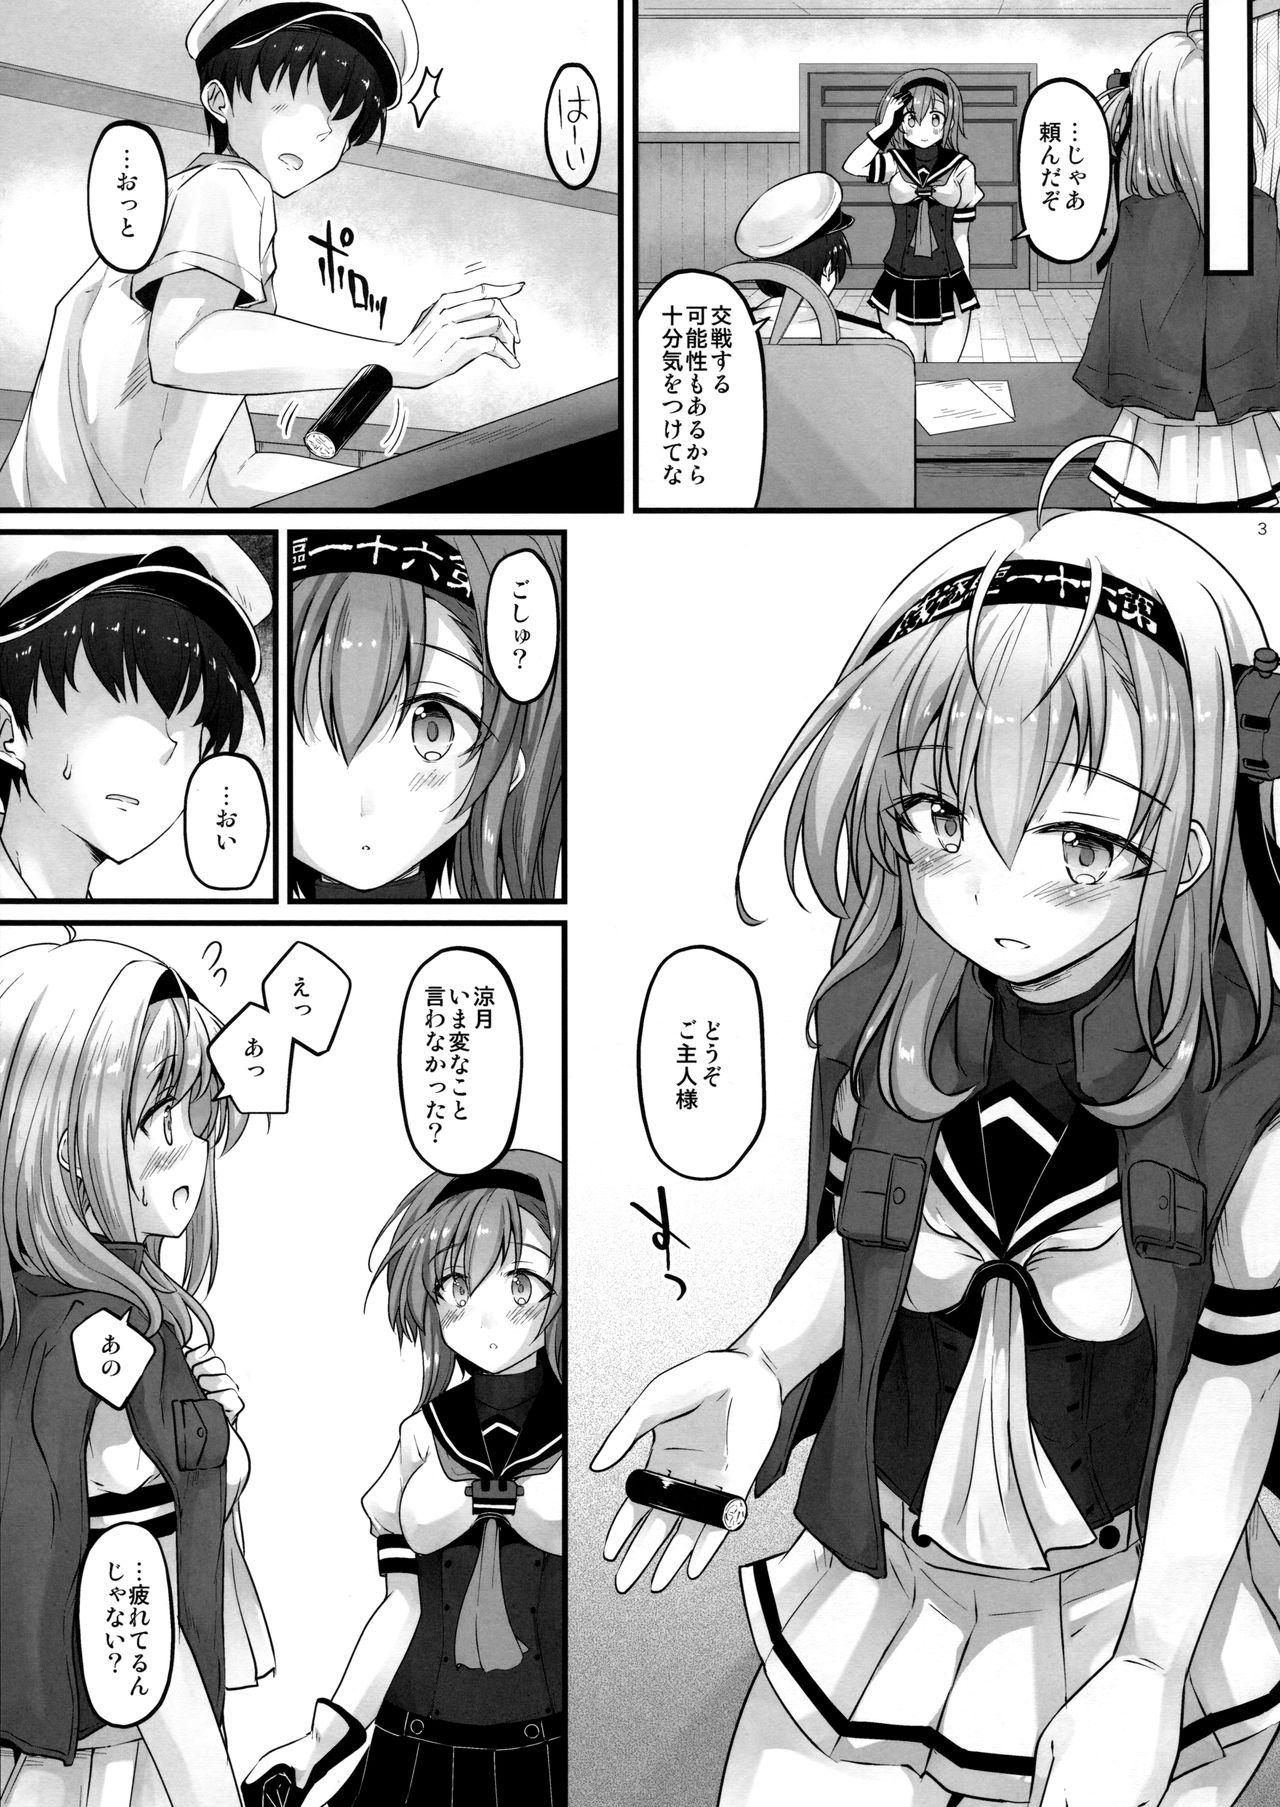 Shecock Invisible Moon - Kantai collection Gostoso - Page 2